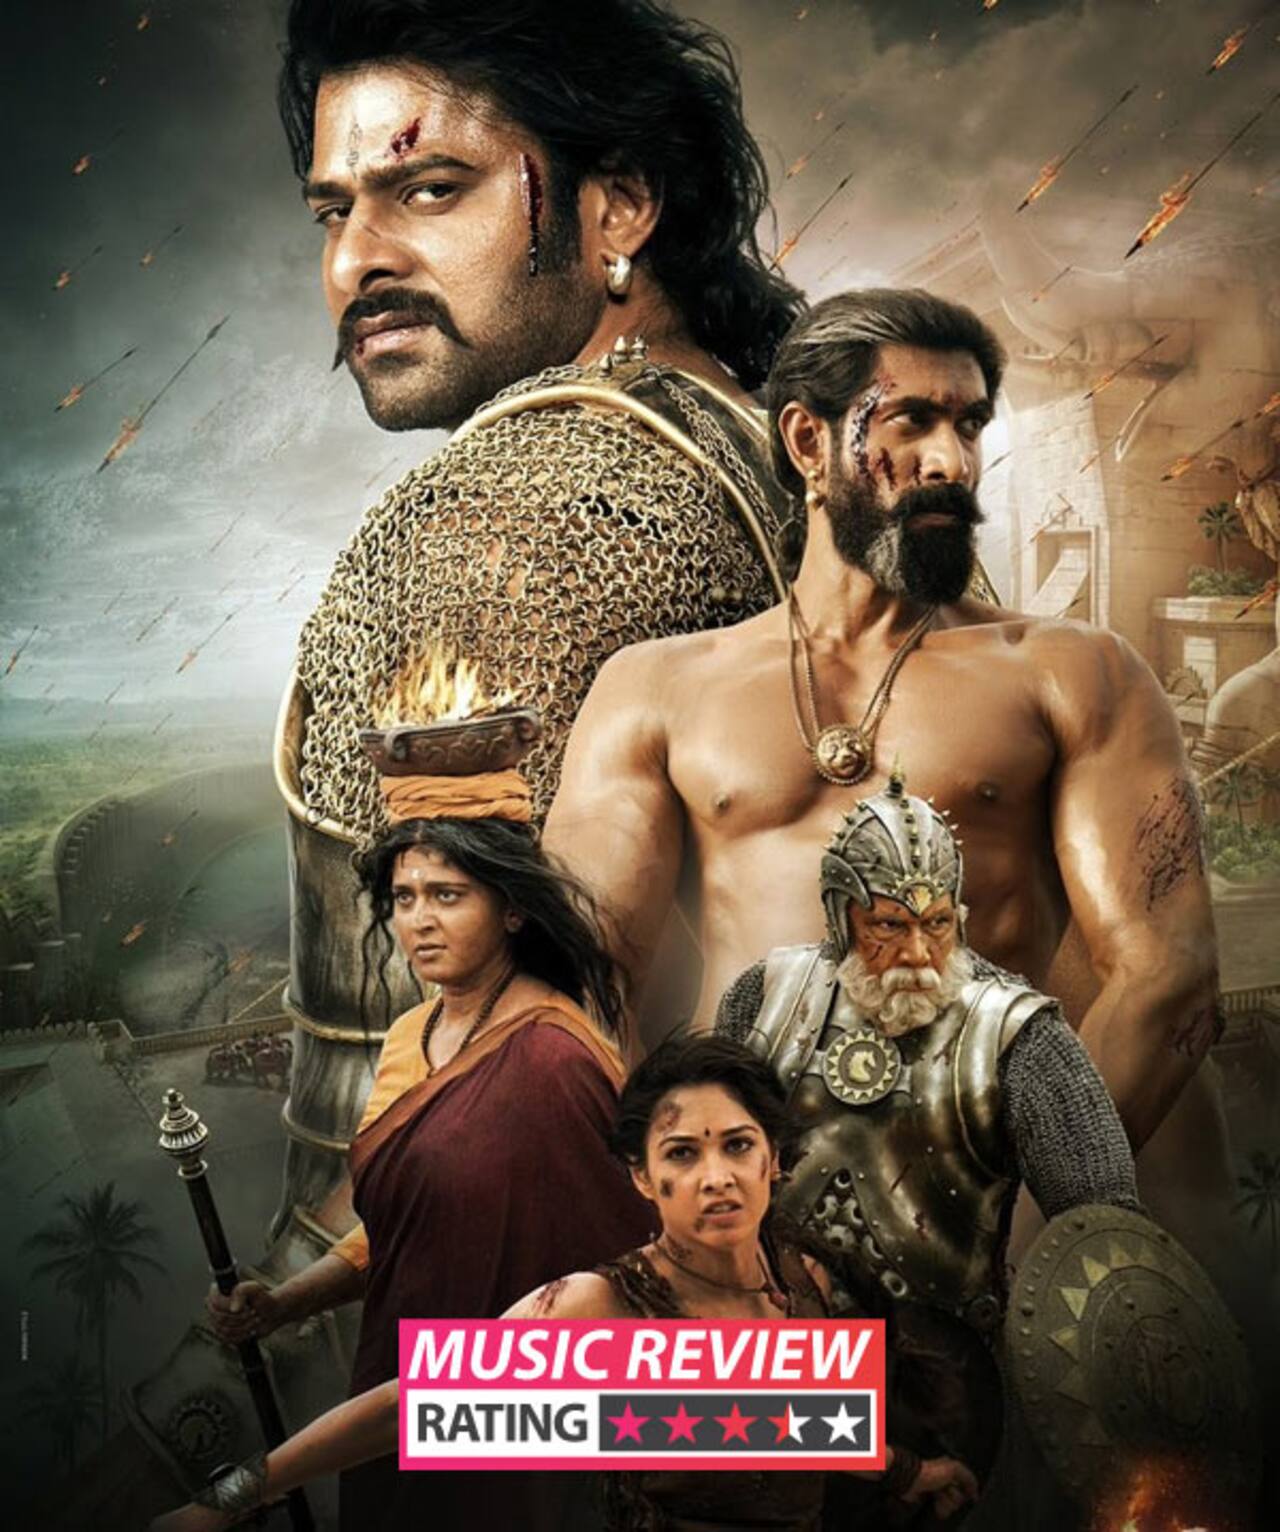 Baahubali 2 Music Review Mm Keeravani Composes A Majestic Soundtrack For Prabhas And Rana